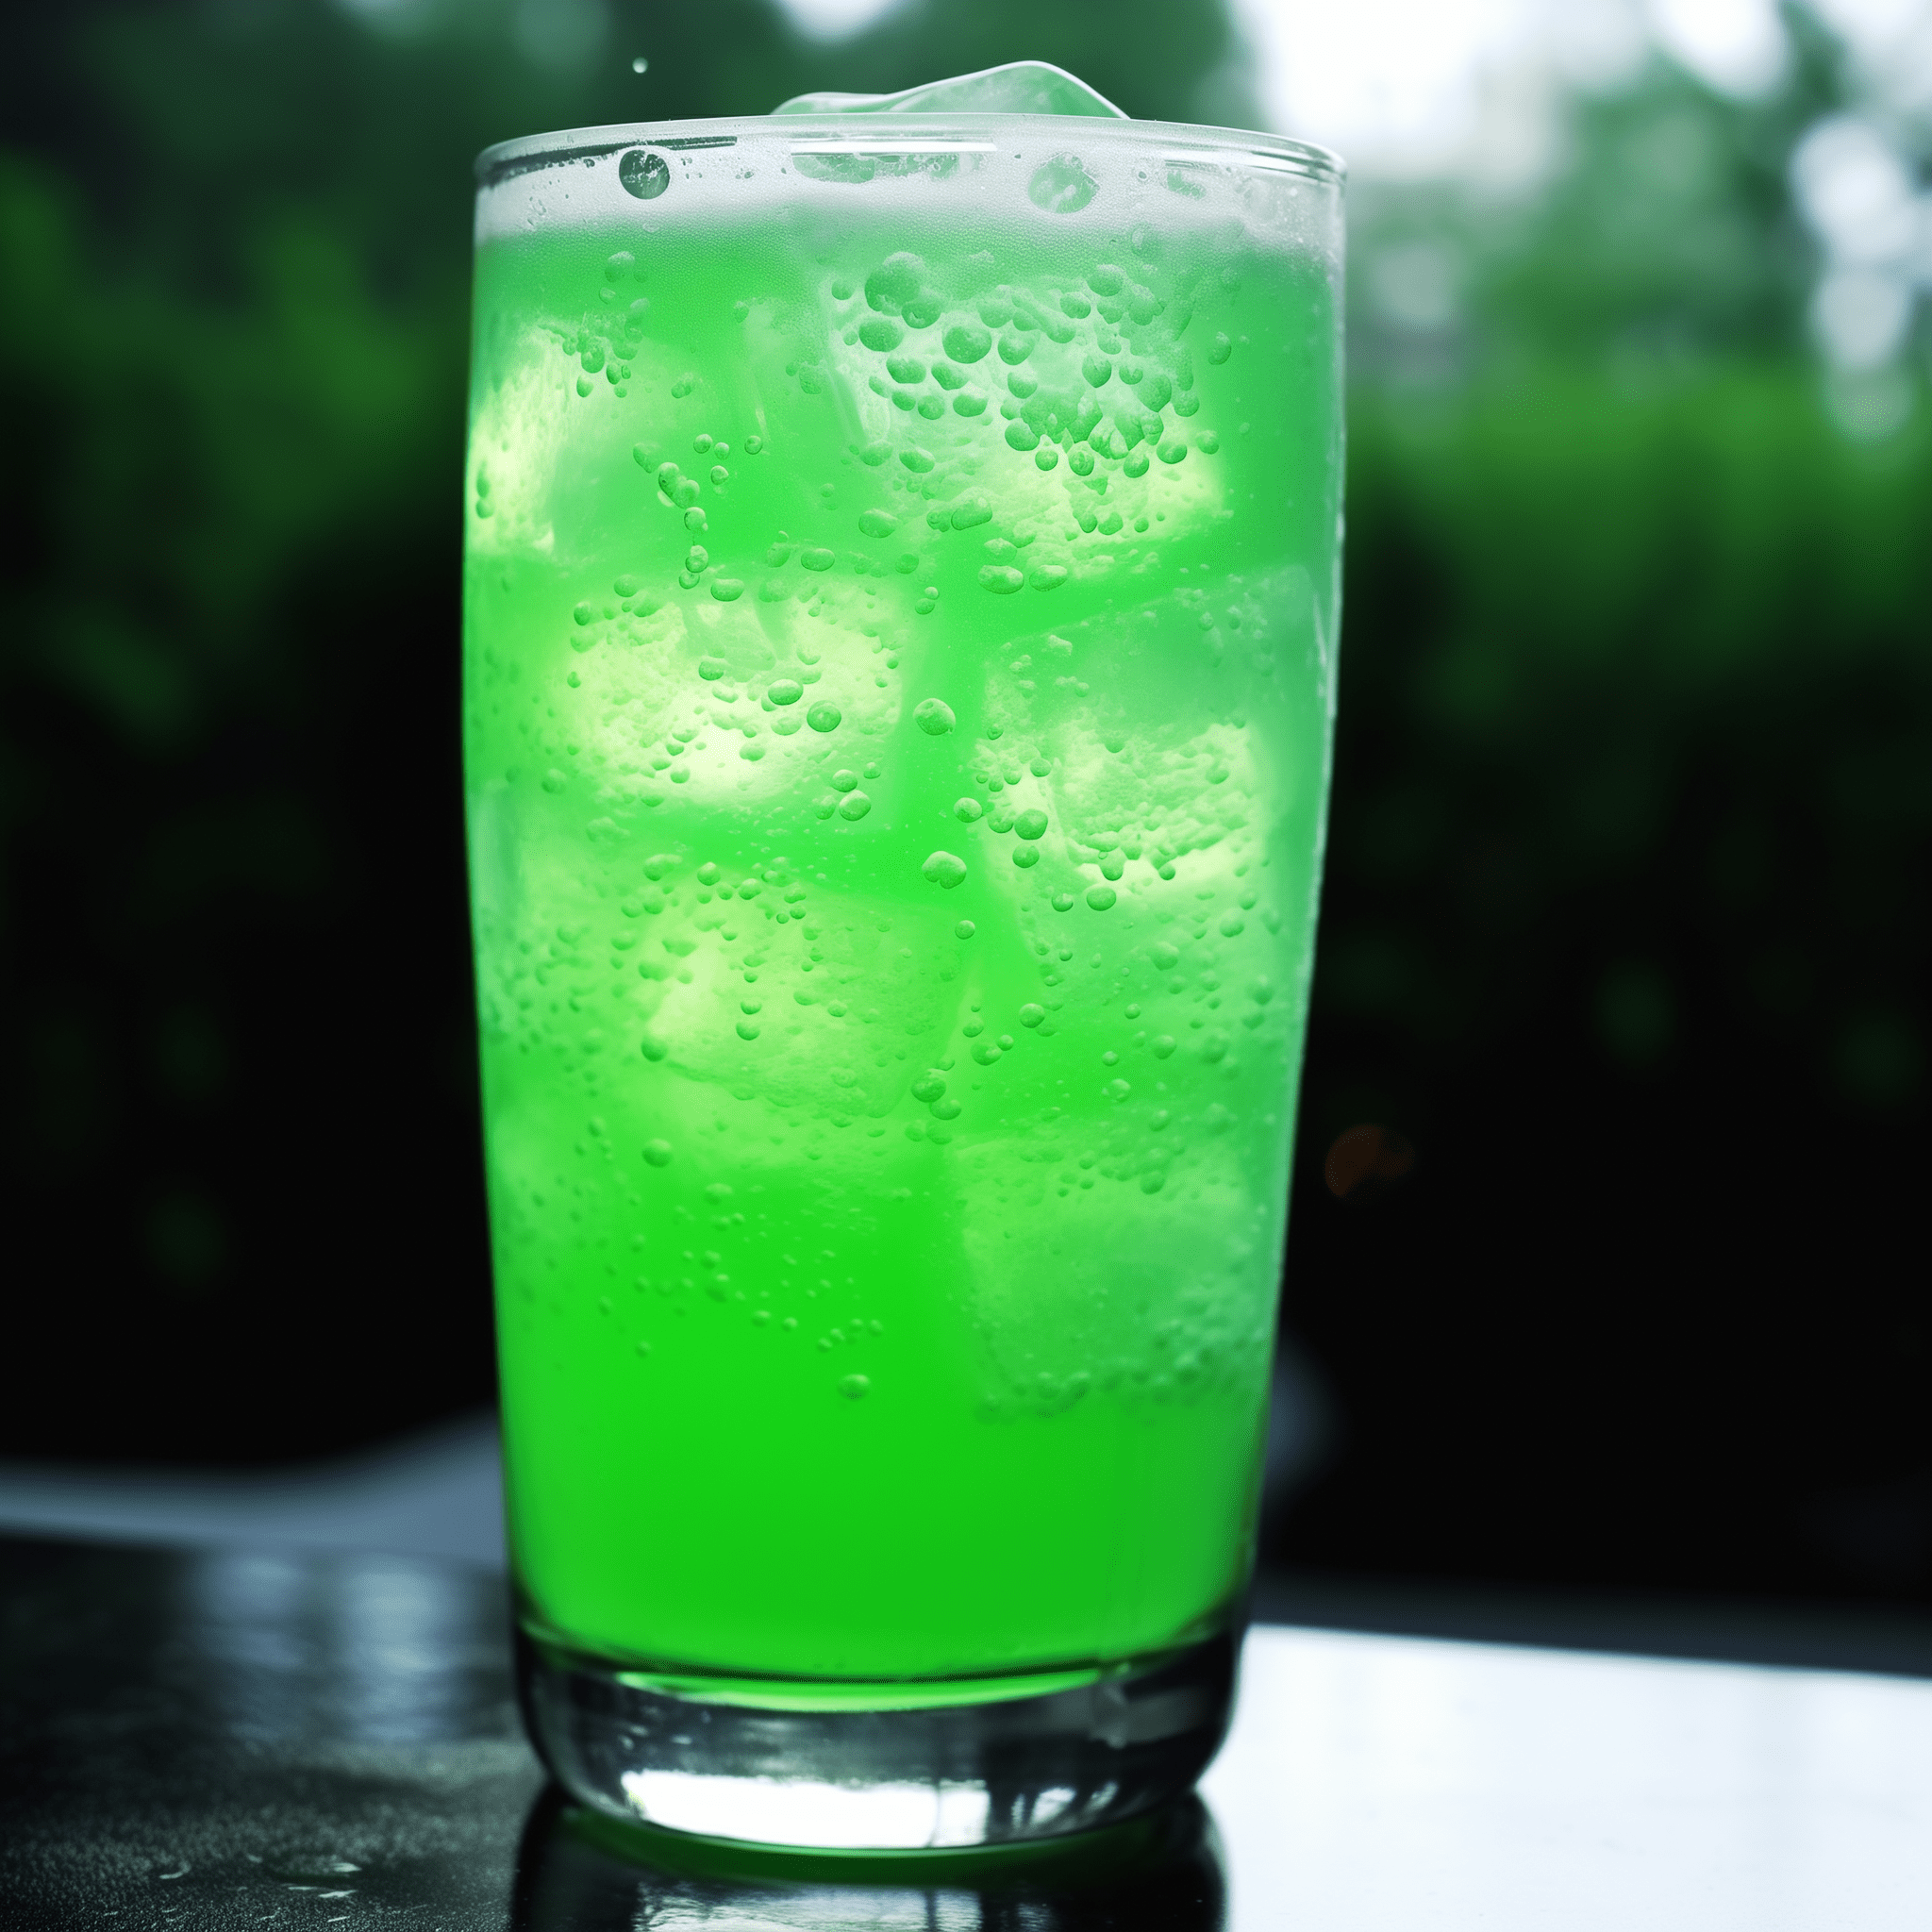 Vodka Monster Cocktail Recipe - The Vodka Monster cocktail is a high-octane blend that's both sweet and tart. The energy drink provides a sugary base with a citrus kick, while the vodka delivers a clean, strong alcoholic punch.